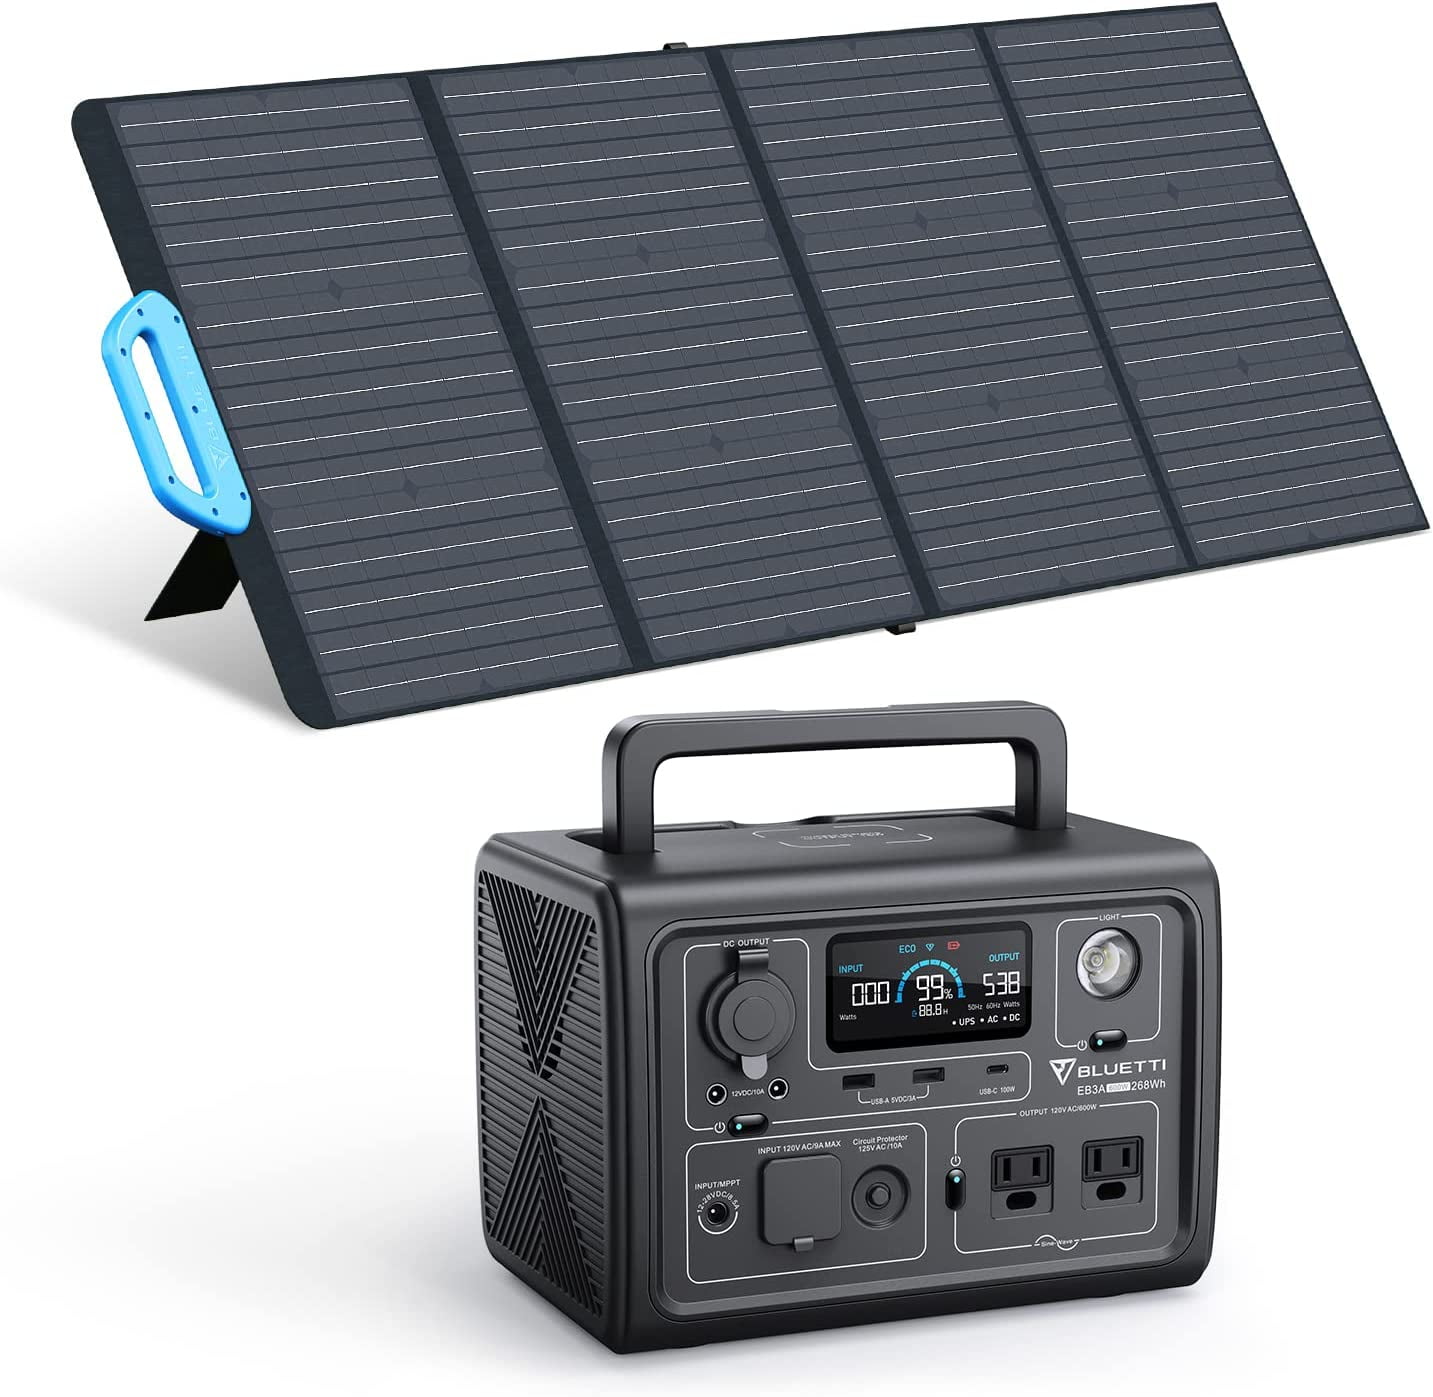 Bluetti EB3A Portable Solar Generator 268Wh Capacity With 120W Solar Panel,  Power Station,600W AC Output for Outdoor Camping, Trip, Power Outage